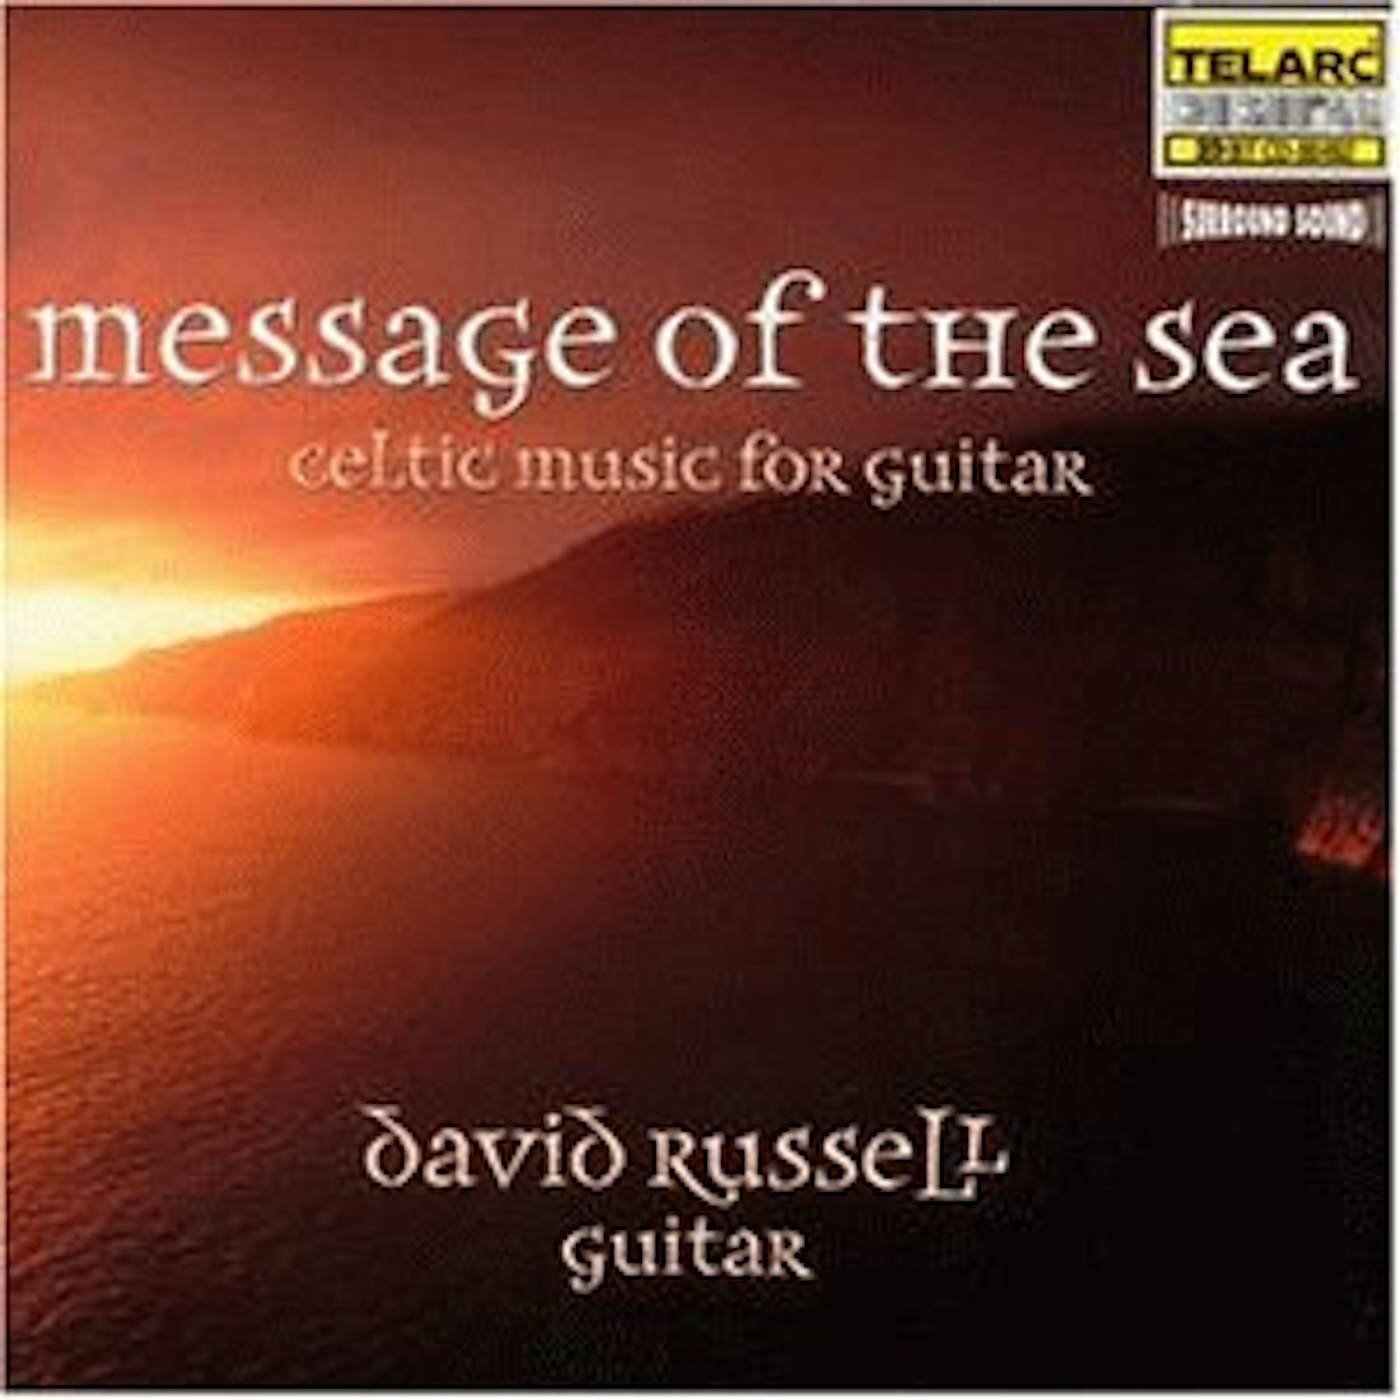 David Russell MESSAGE OF THE SEA: CELTIC MUSIC FOR GUITAR CD